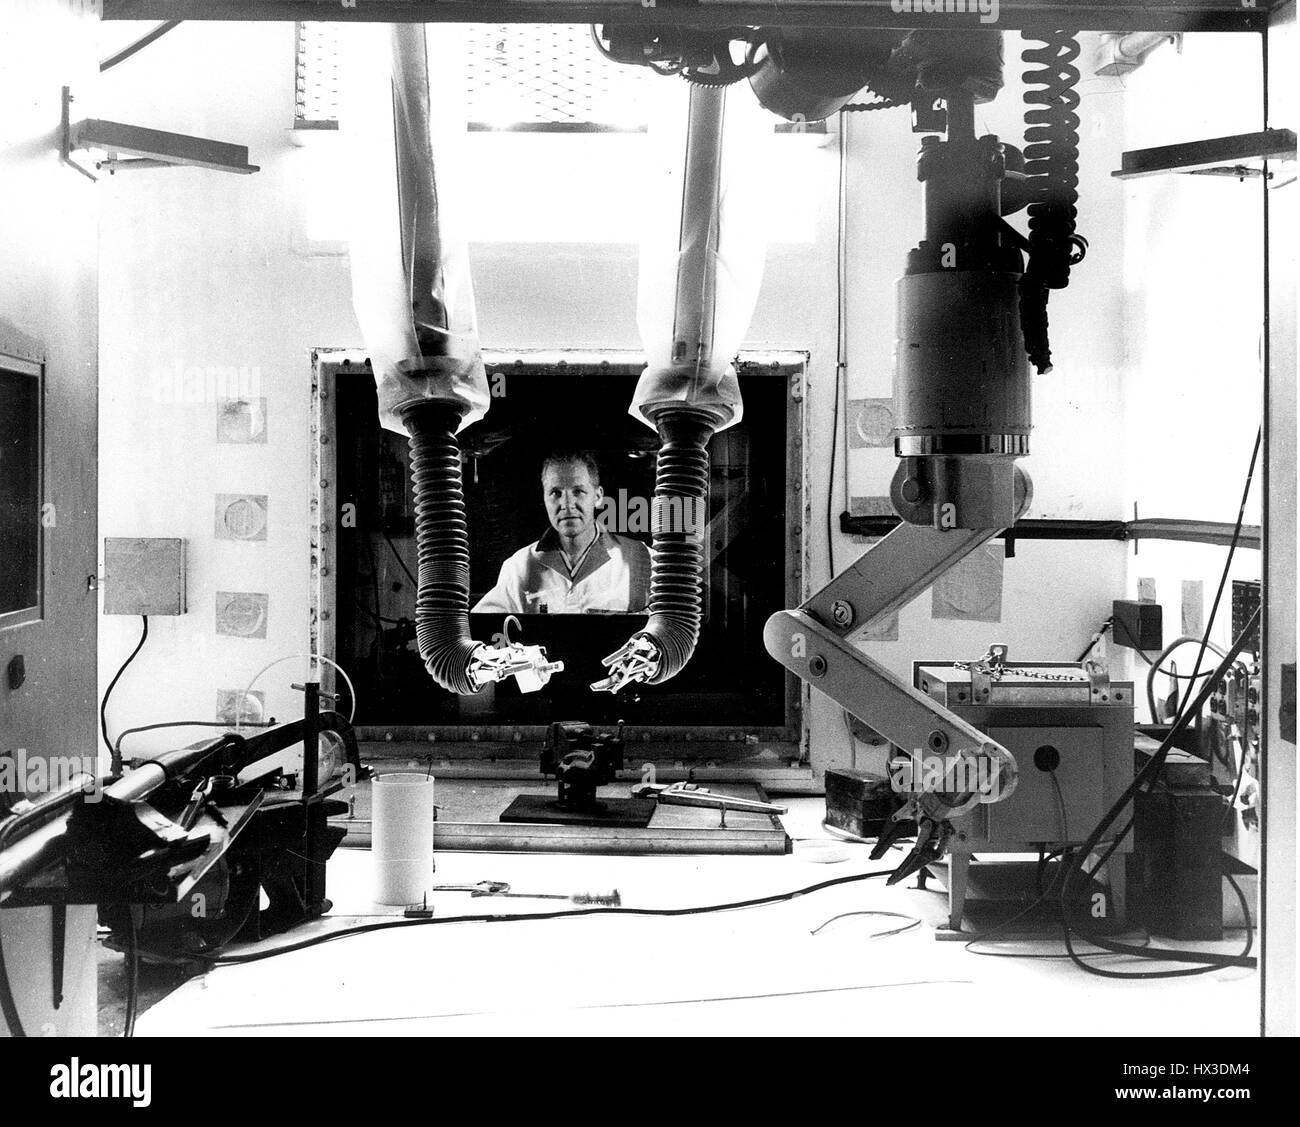 A rear view of the interior of one of the Metallurgy Hot Cells and a researcher operating it, 1970. Image courtesy US Department of Energy. Stock Photo